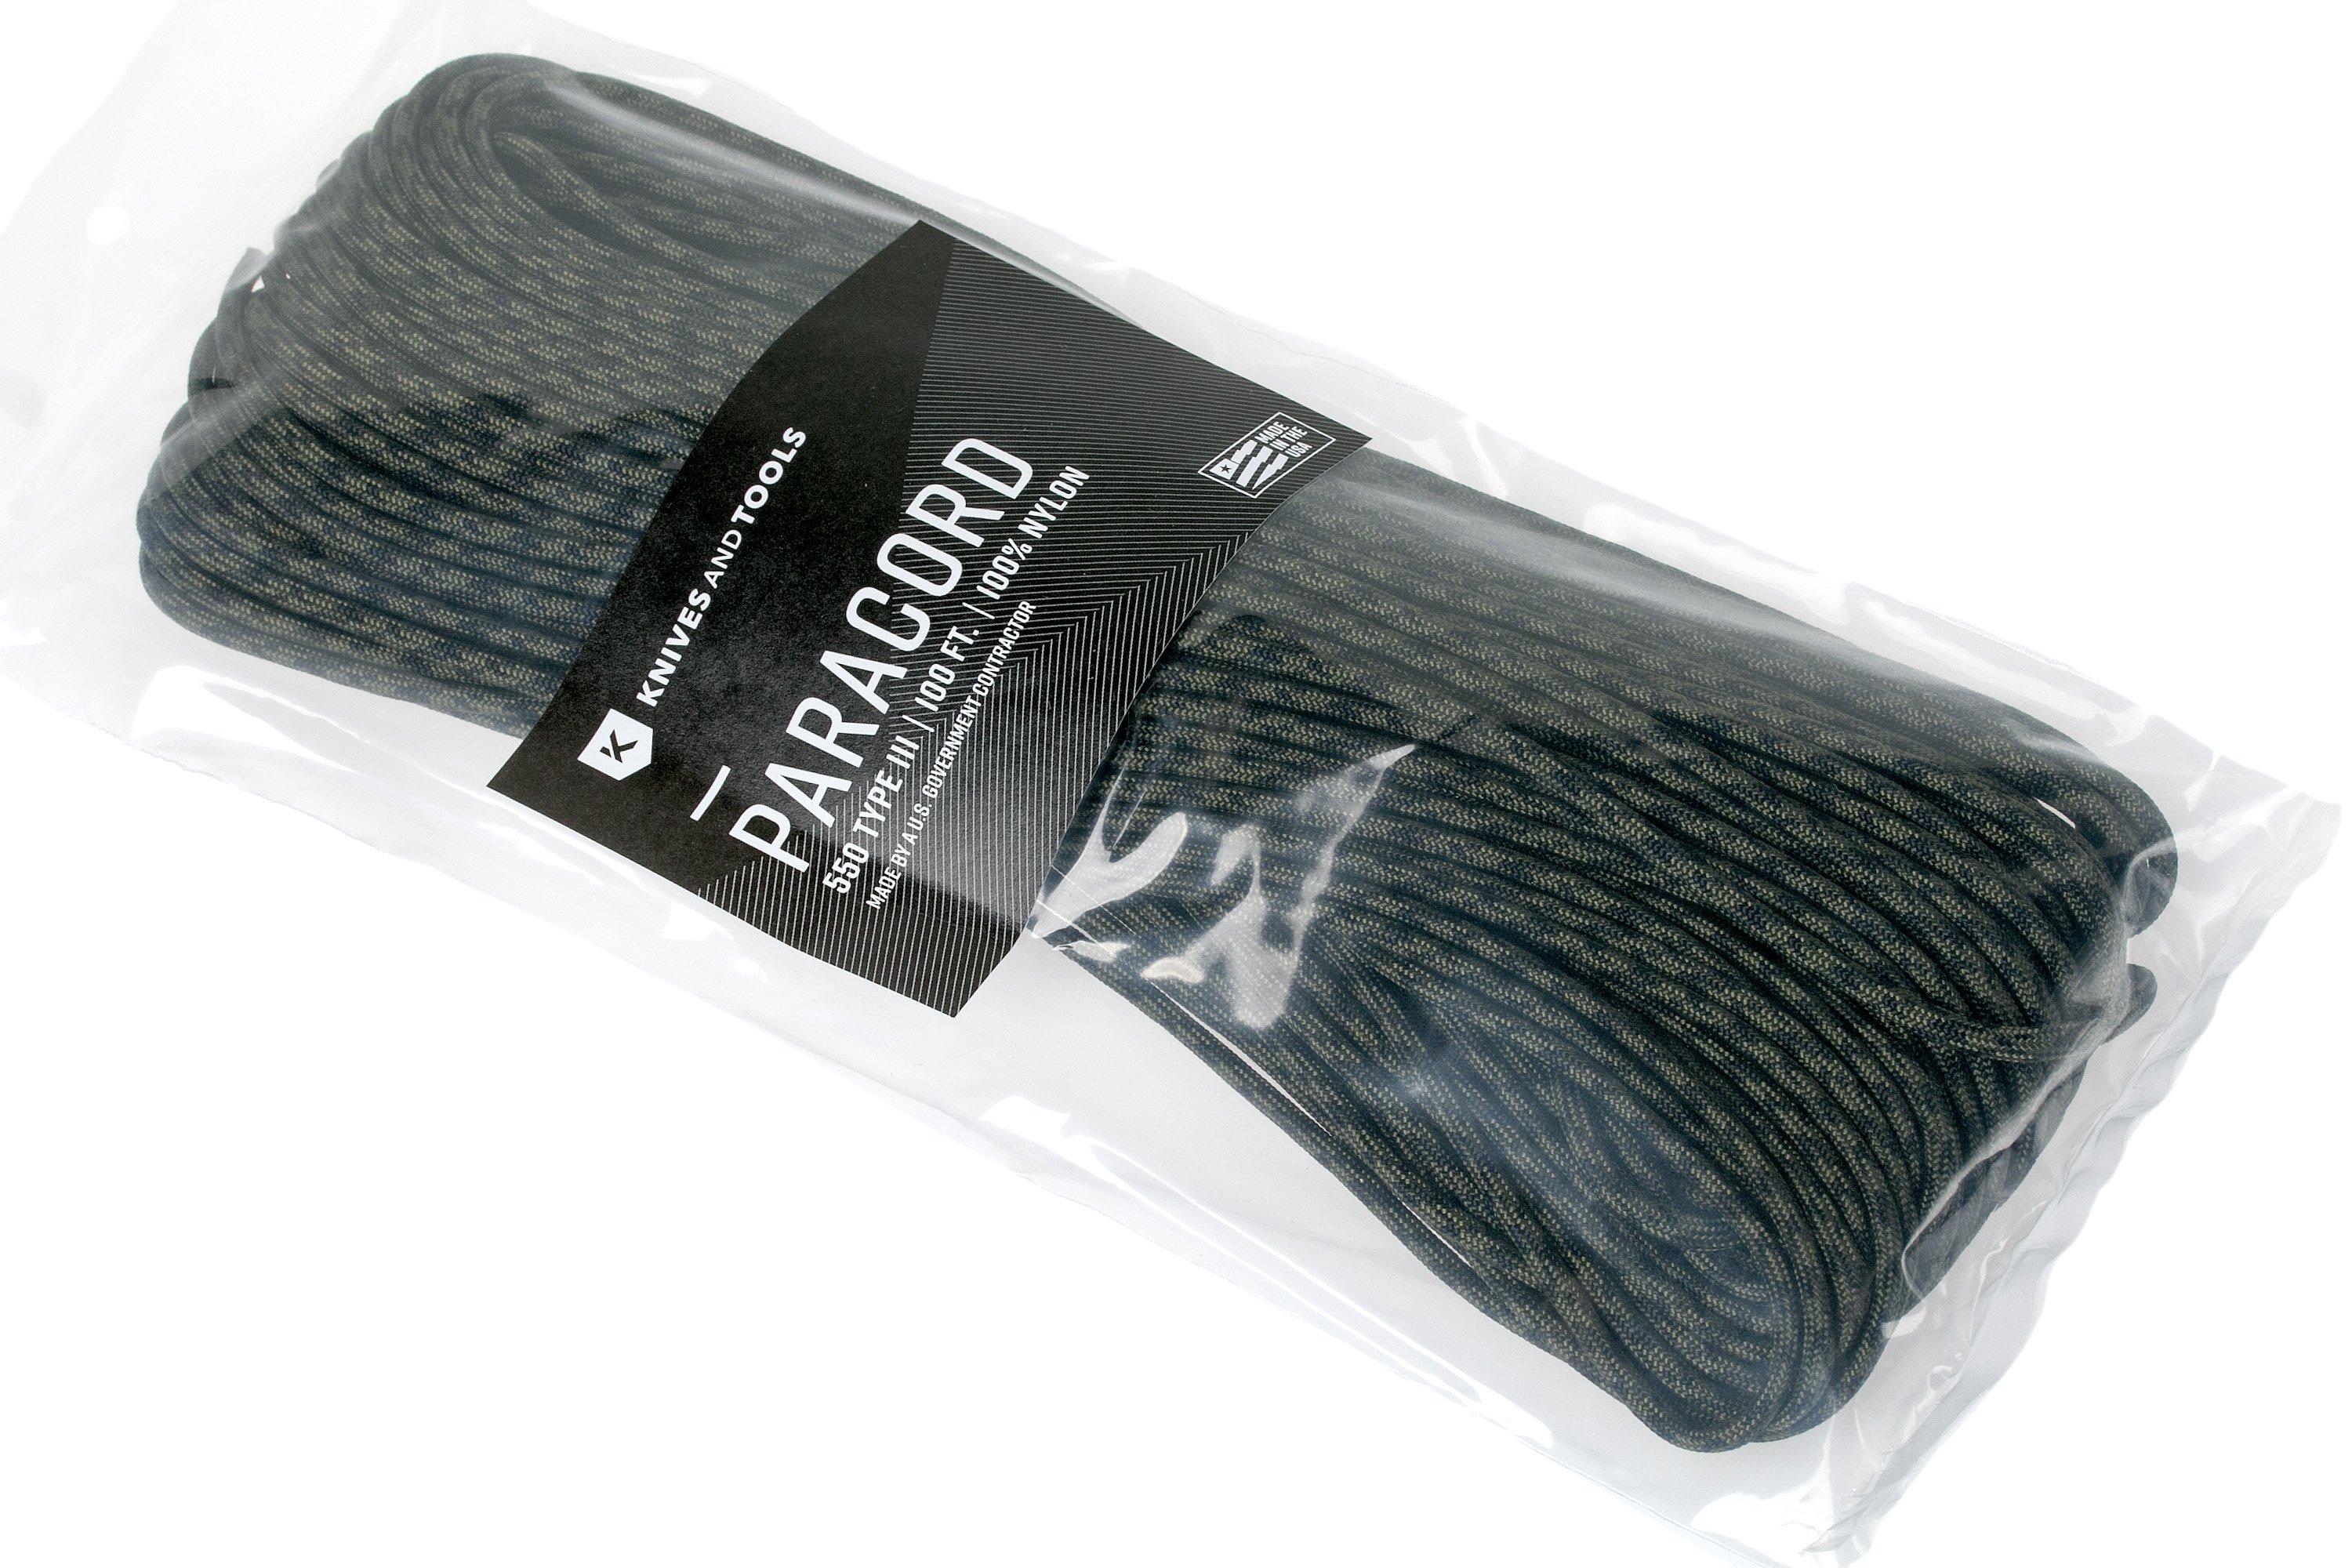 Knivesandtools 550 paracord type III, couleur : olive drab & black camo,  100 ft (30,48 m)